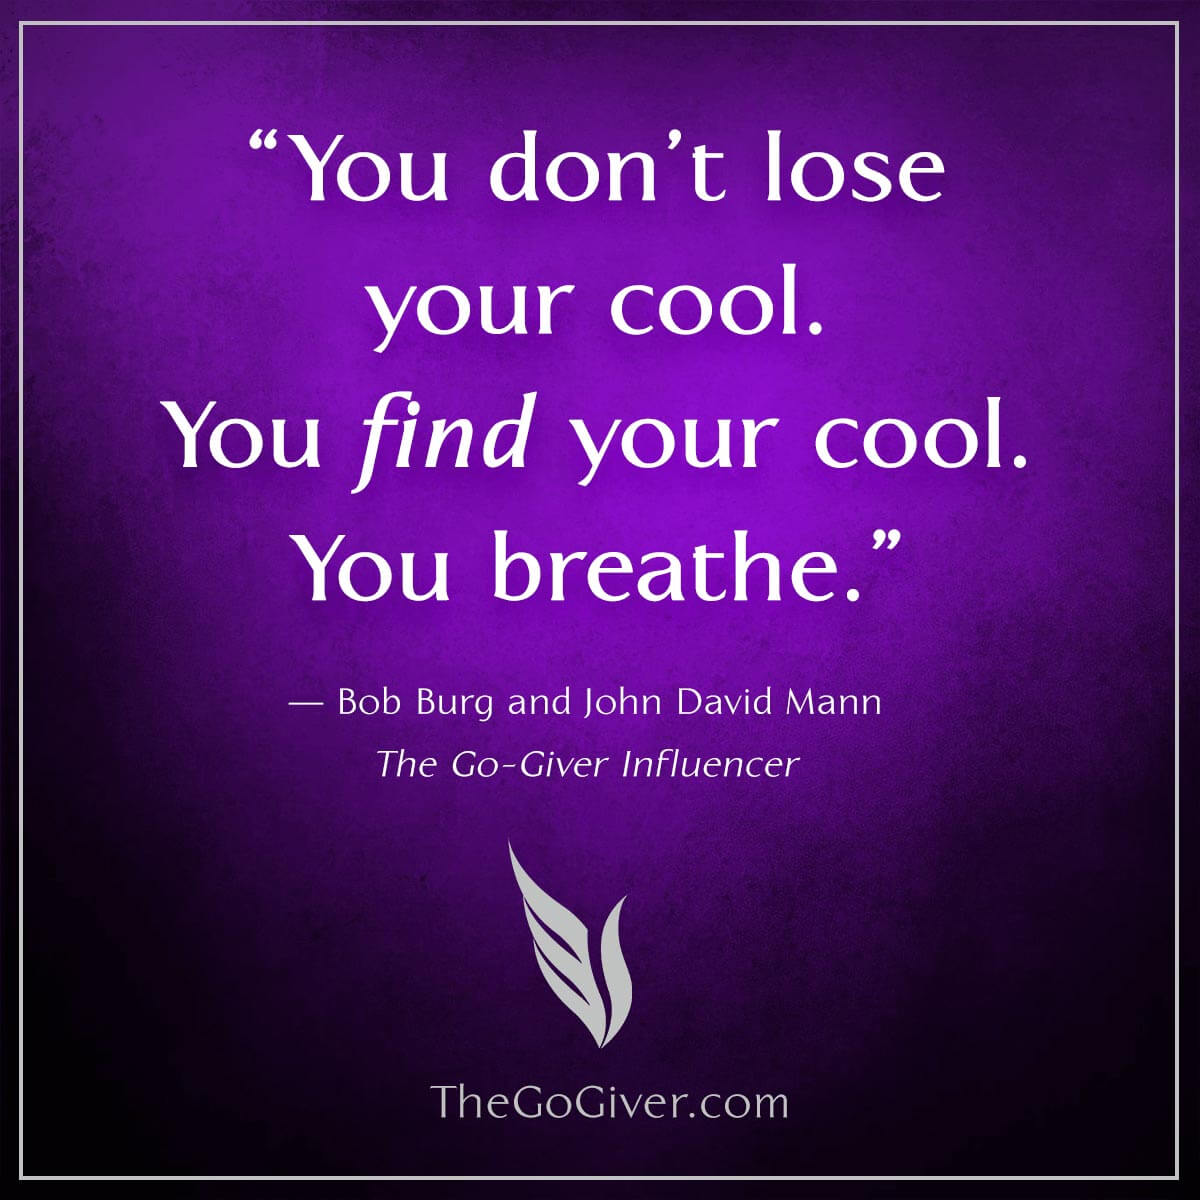 You don't lose your cool. You find your cool. You breathe - The Go-Giver Influencer